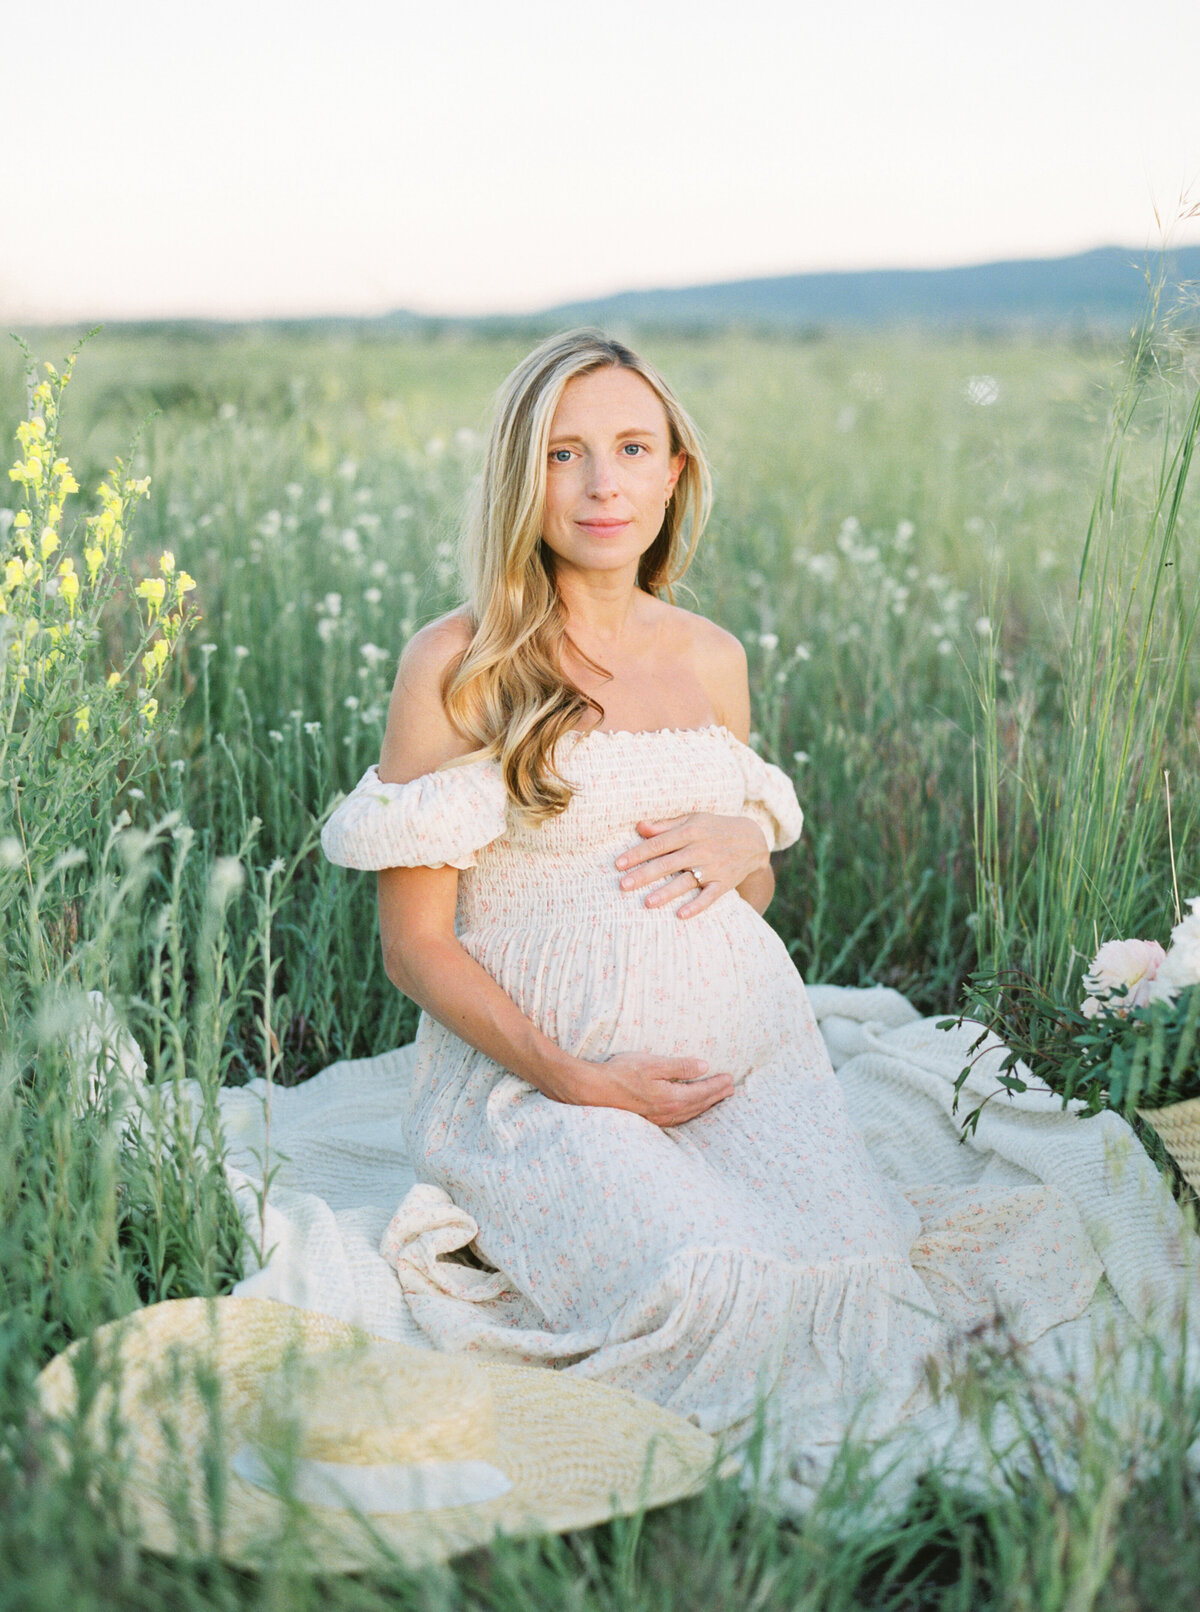 Boulder photographer featuring maternity photography session in a field.